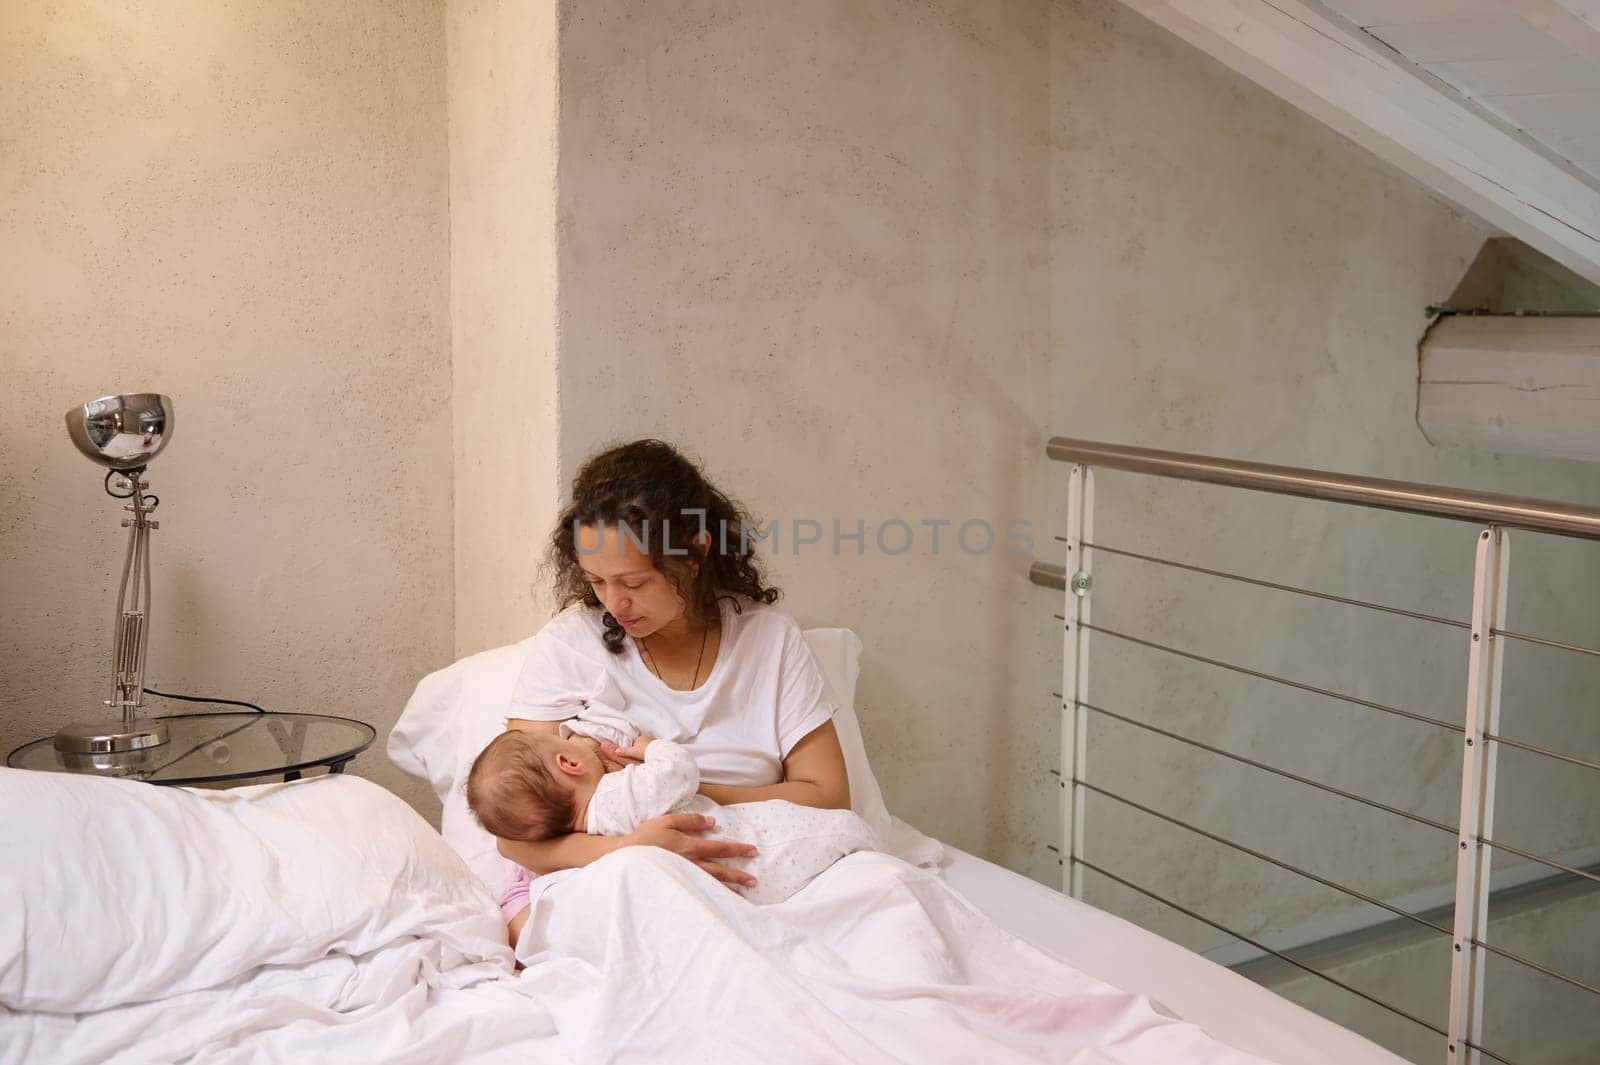 Young woman mother holding and breastfeeding her newborn baby, sitting on the bed in white bedchamber interior by artgf